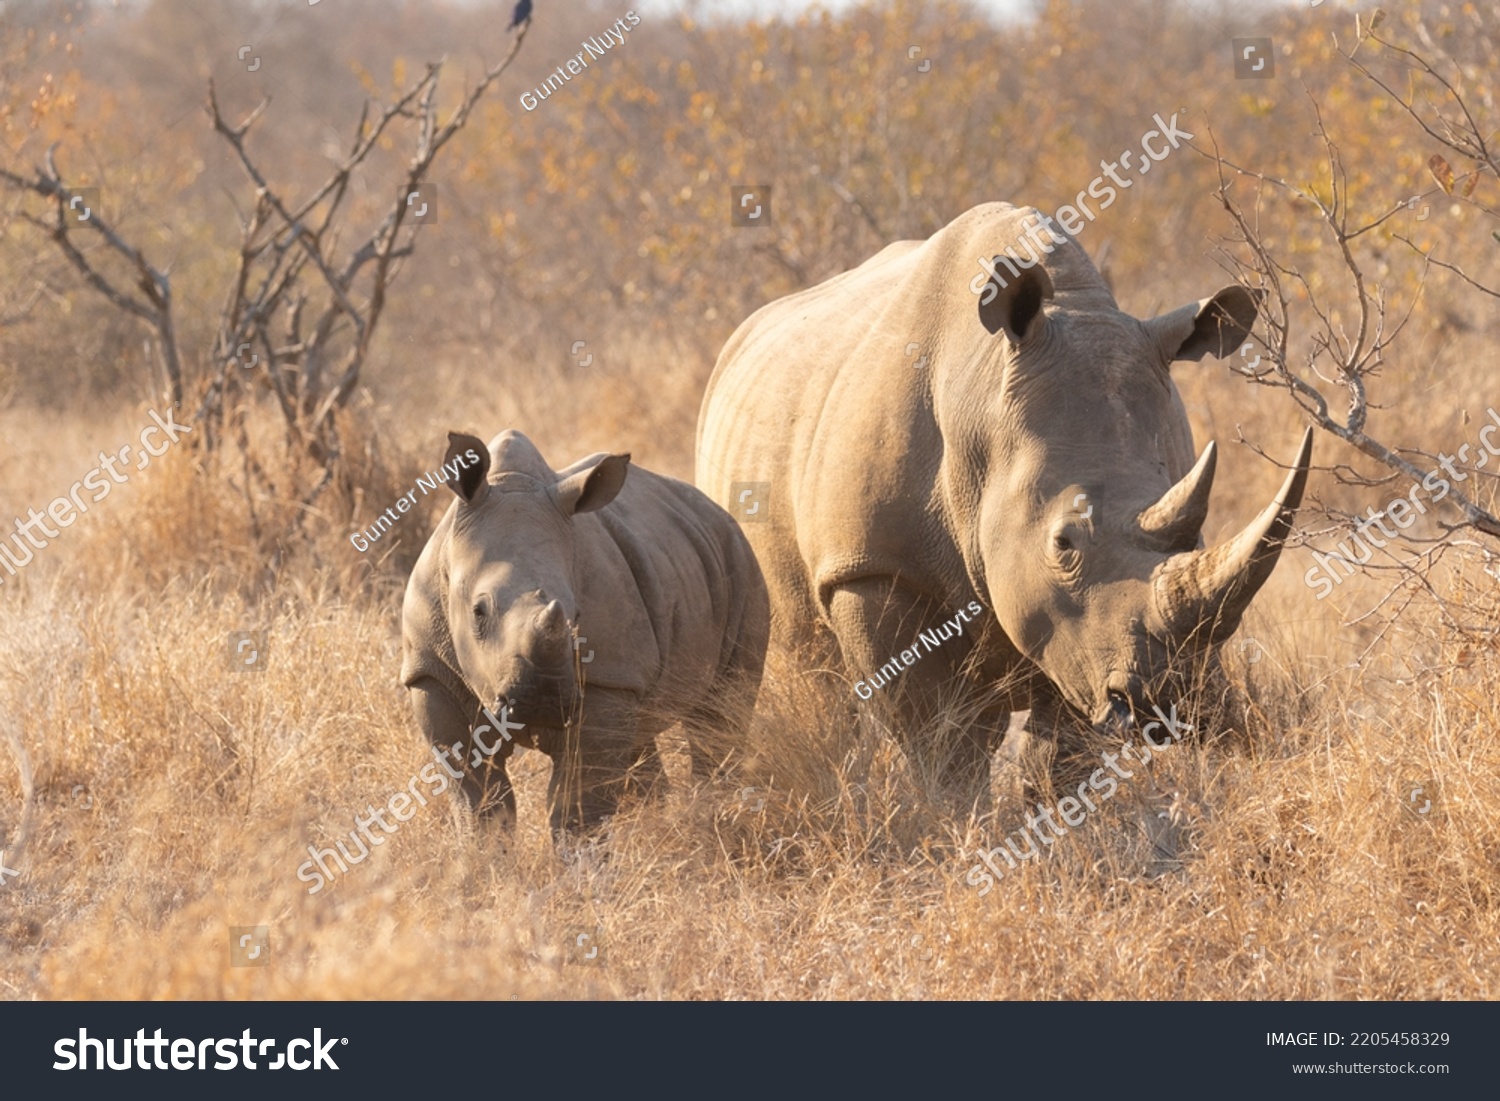 White rhinoceros with a calf (Ceratotherium simum) in the early morning light, Timbavati Game Reserve, South Africa. #2205458329